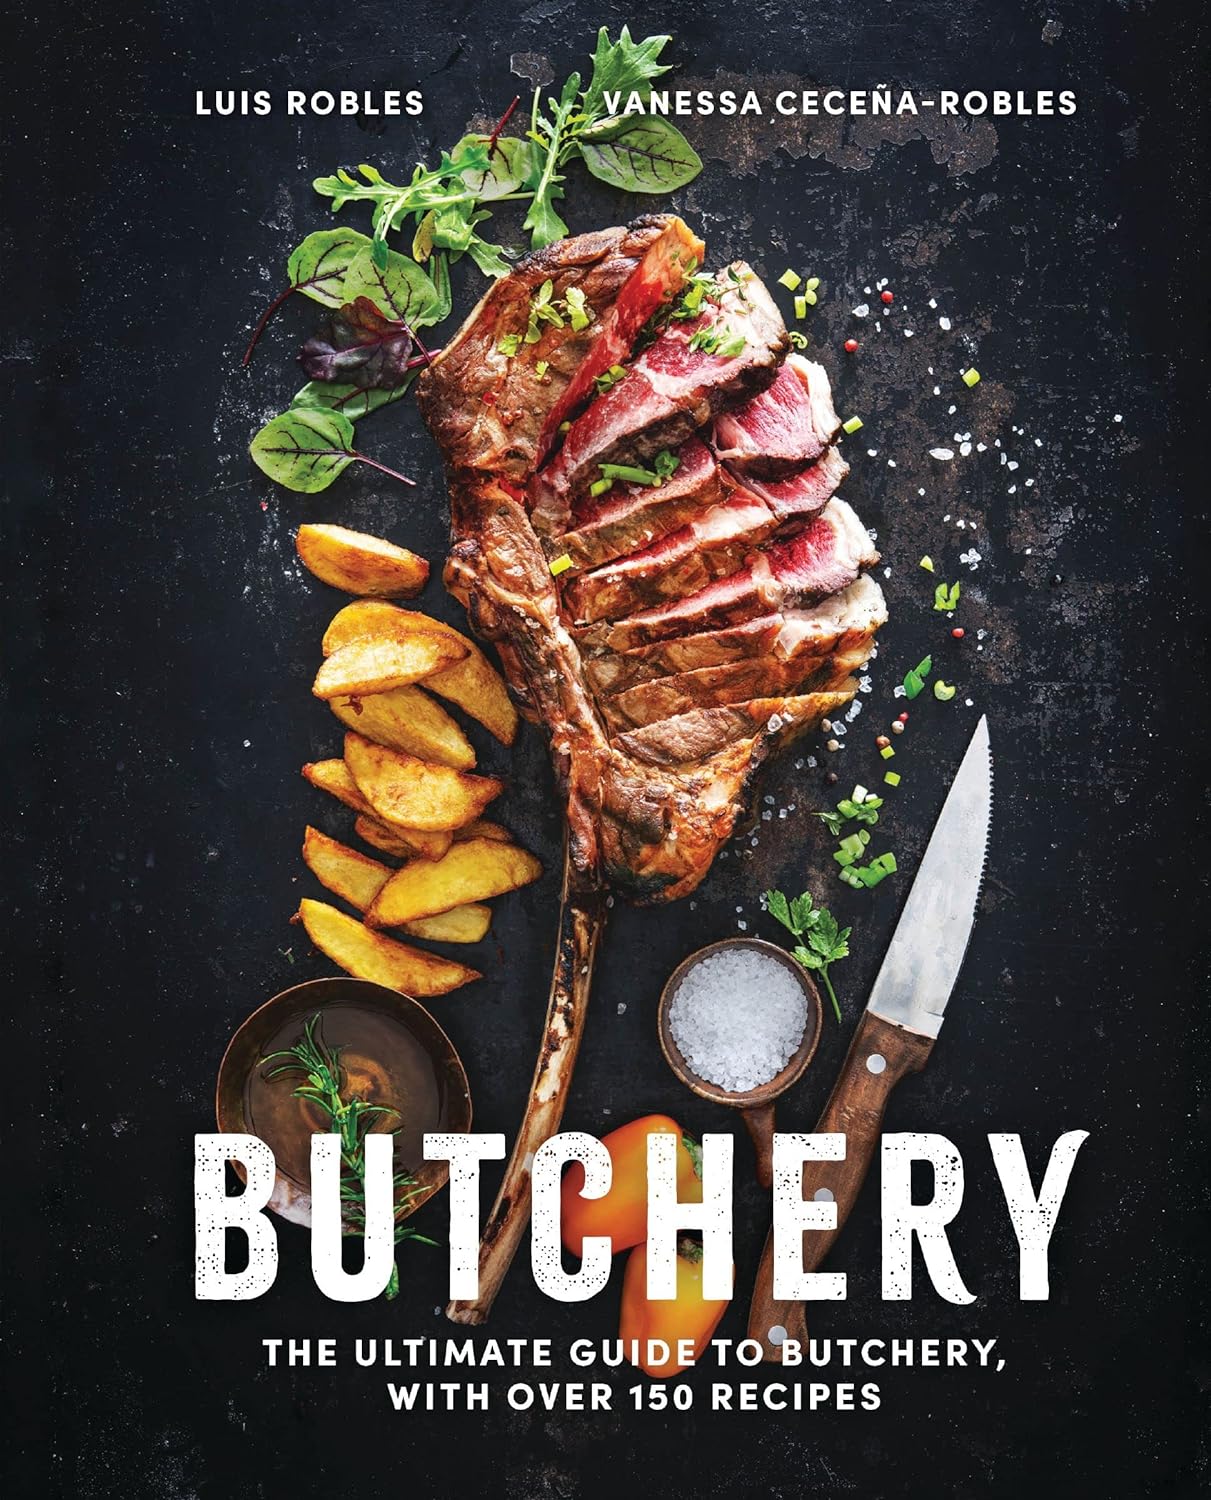 Butchery: The Ultimate Guide to Butchery and Over 100 Recipes (Luis Robles, Vanessa Ceceña)